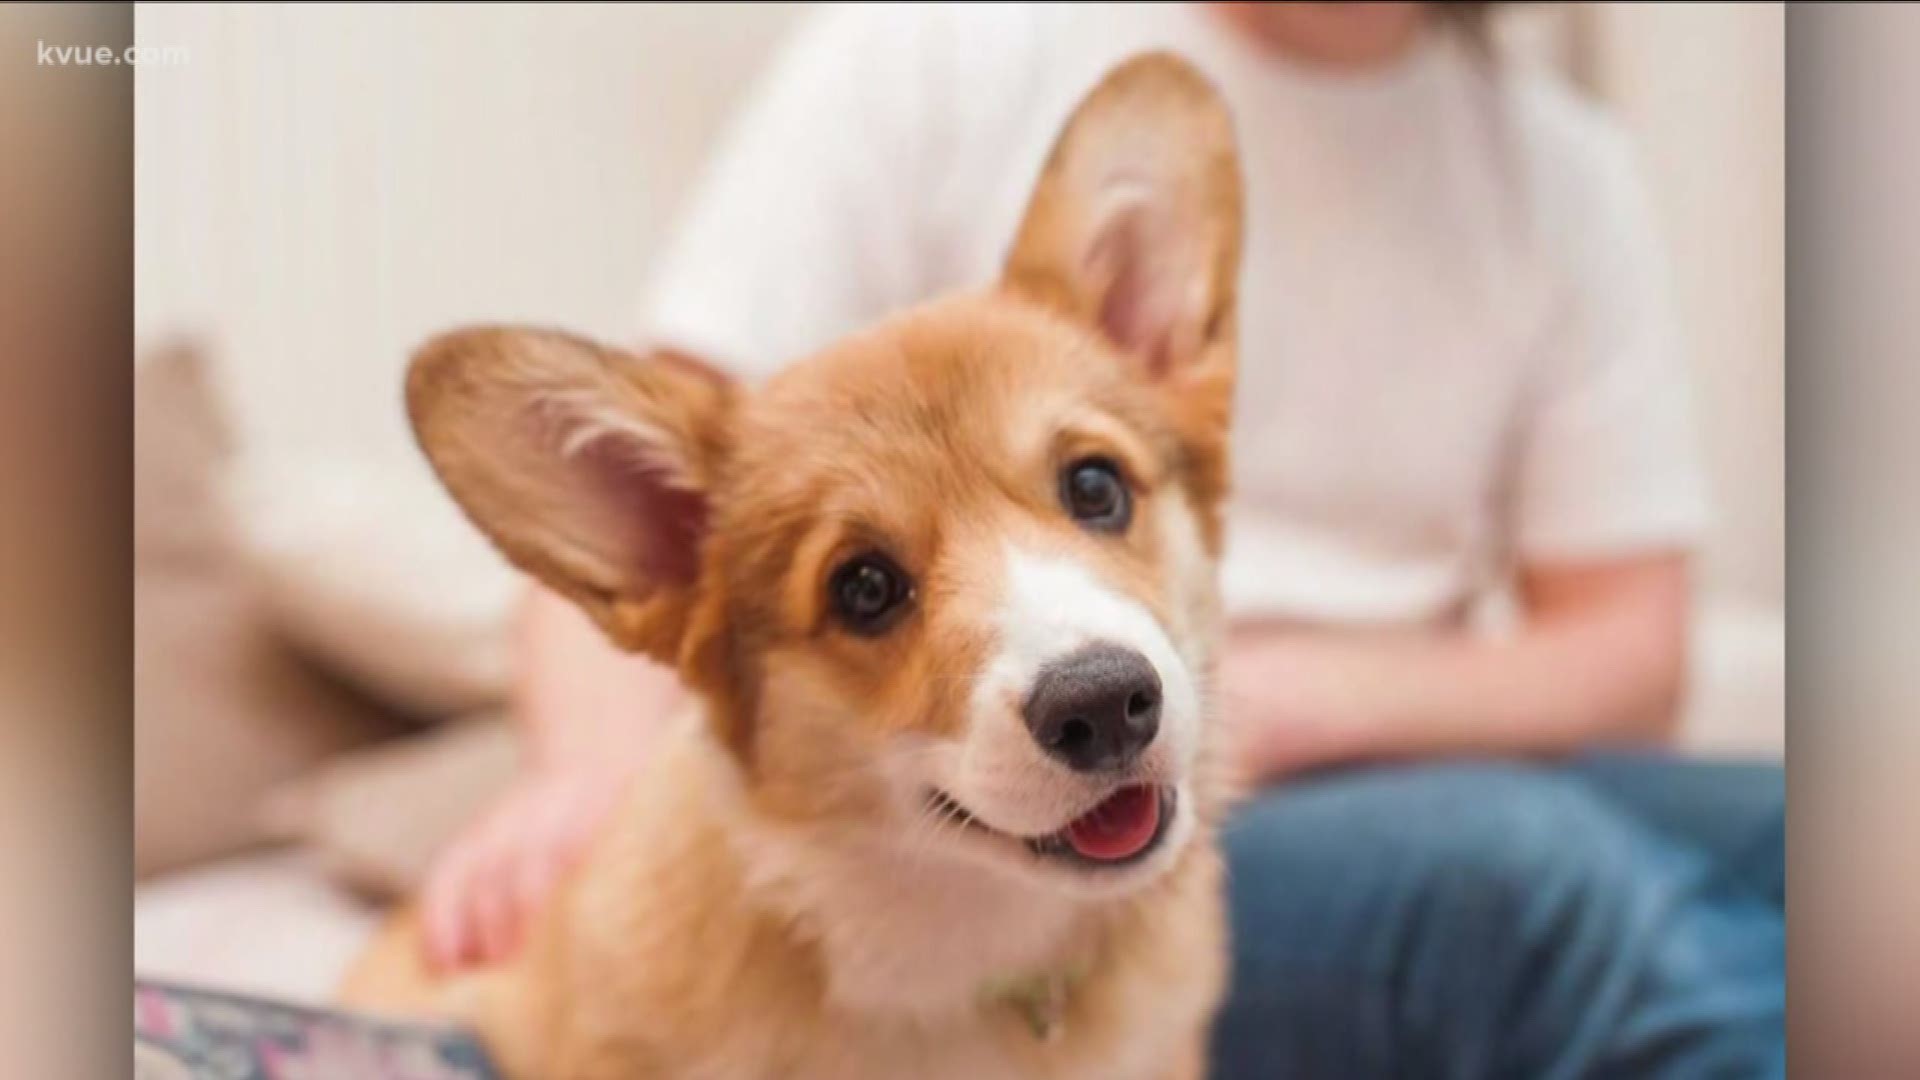 A certain breed of dog has become so pup-ular in the Austin area that there's a meet-up this week just for corgi owners.